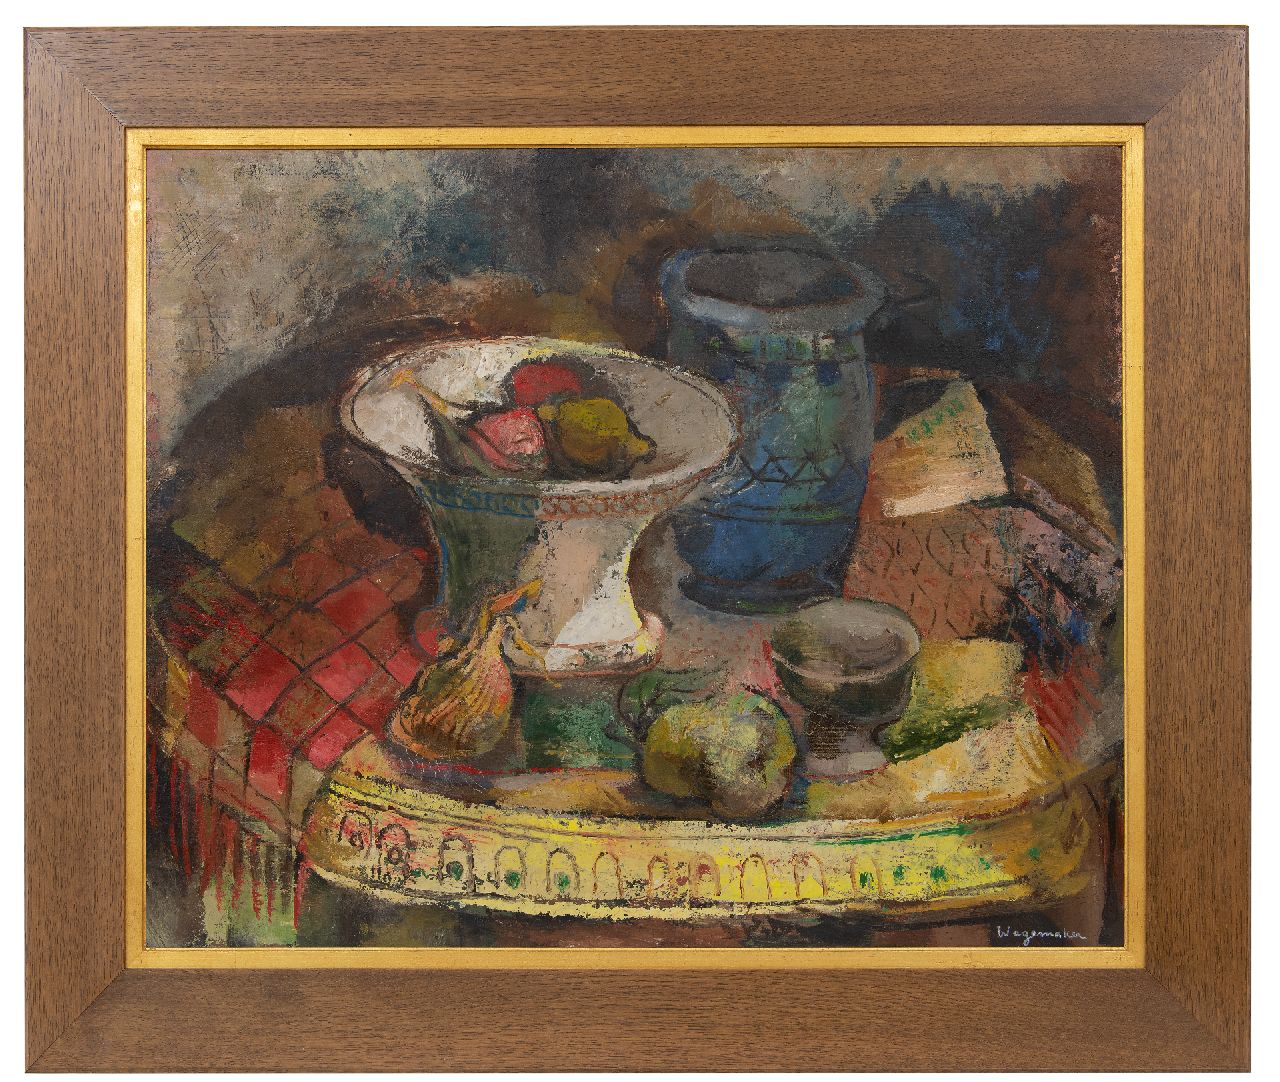 Wagemaker A.B.  | Adriaan Barend 'Jaap' Wagemaker | Paintings offered for sale | A still life with vases and fruit, oil on canvas 70.4 x 85.3 cm, signed l.r.